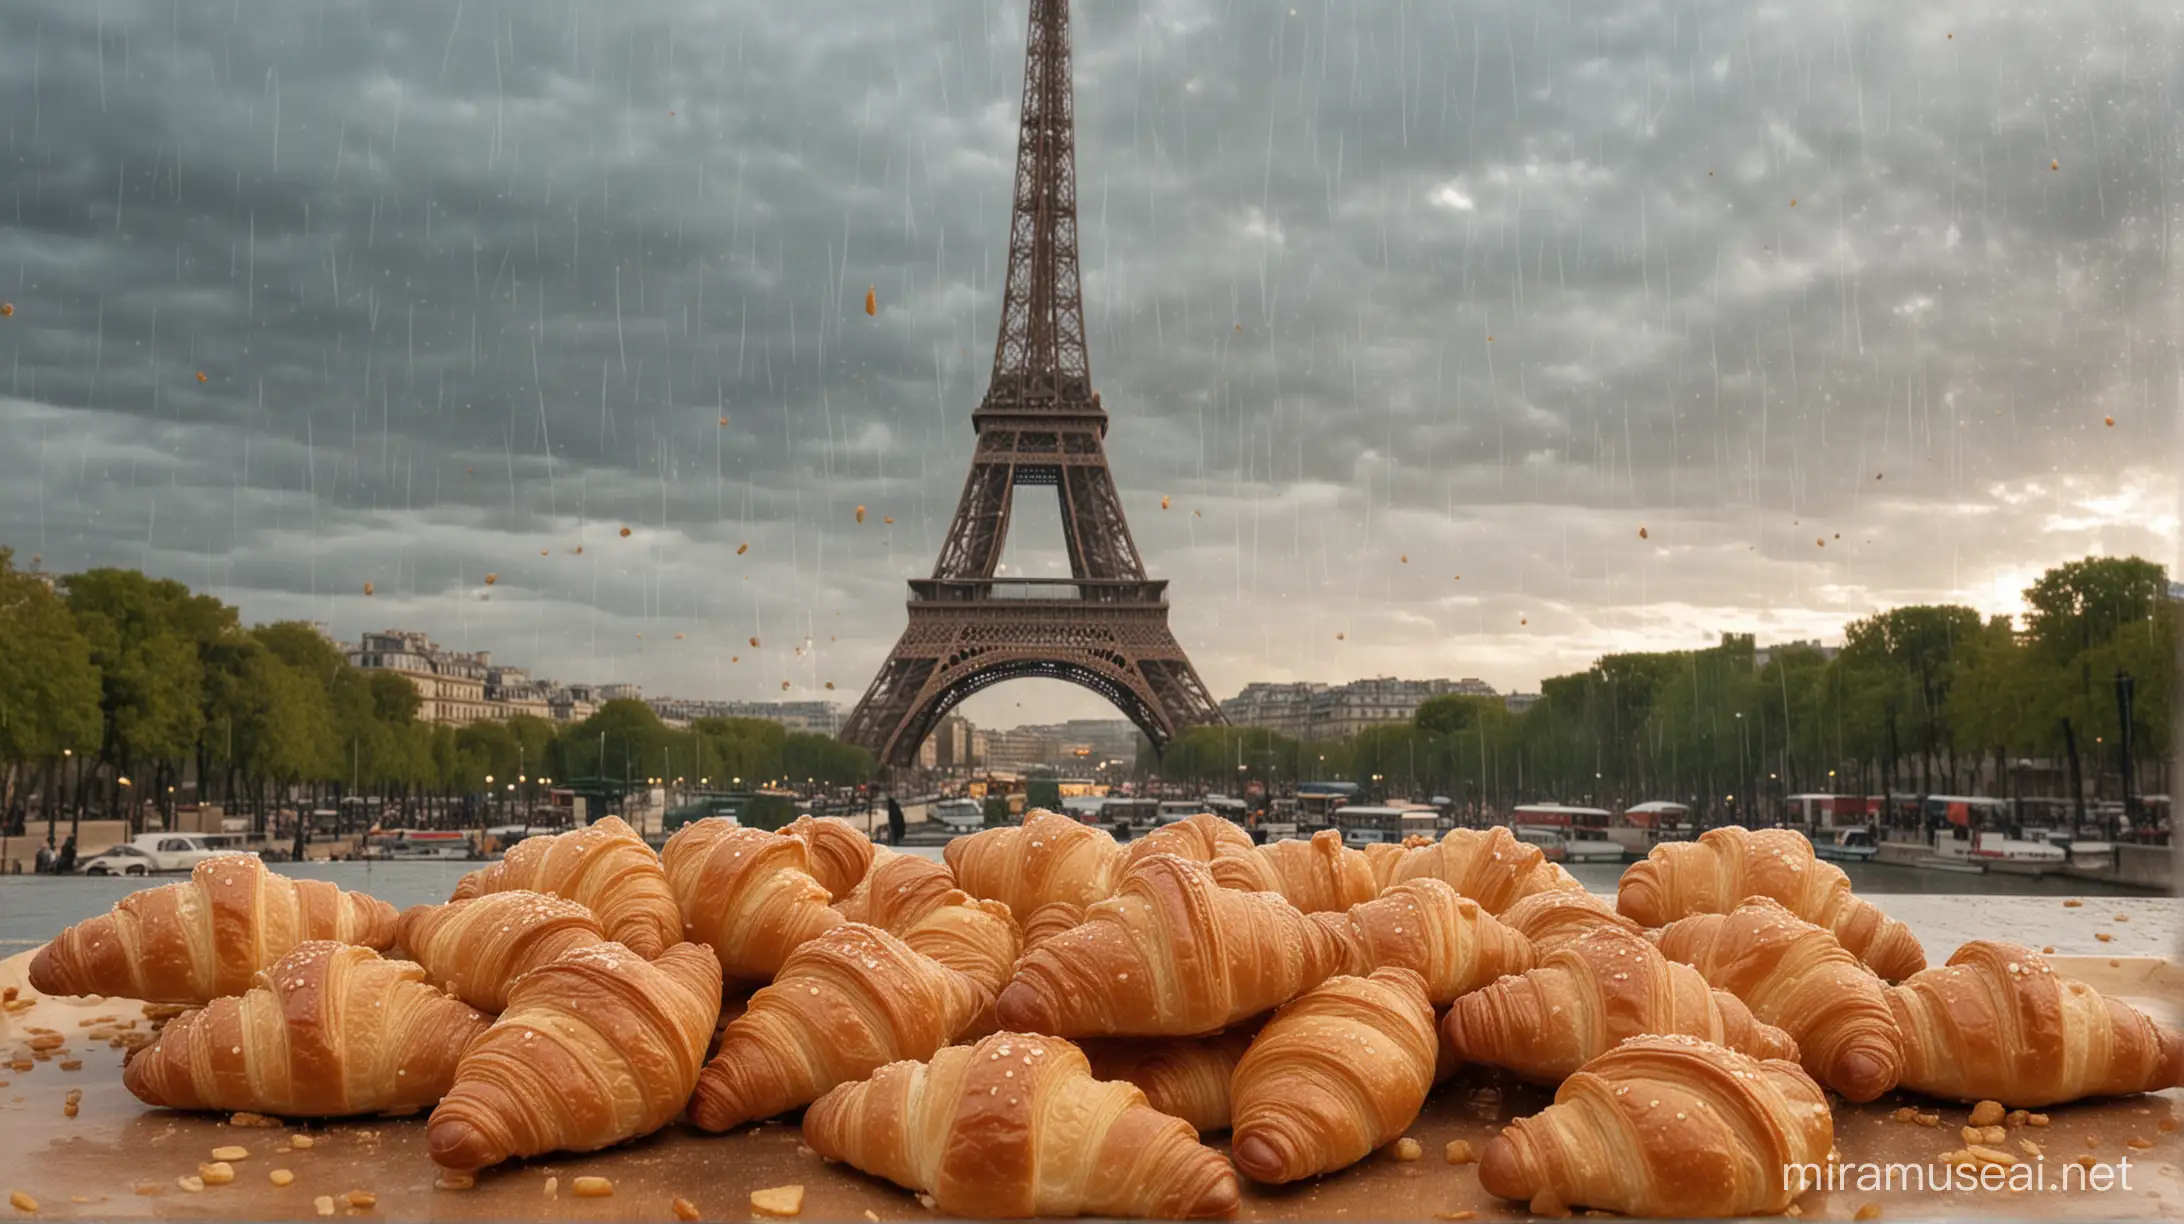 Croissants falling like rain in front of the Eiffel Tower
